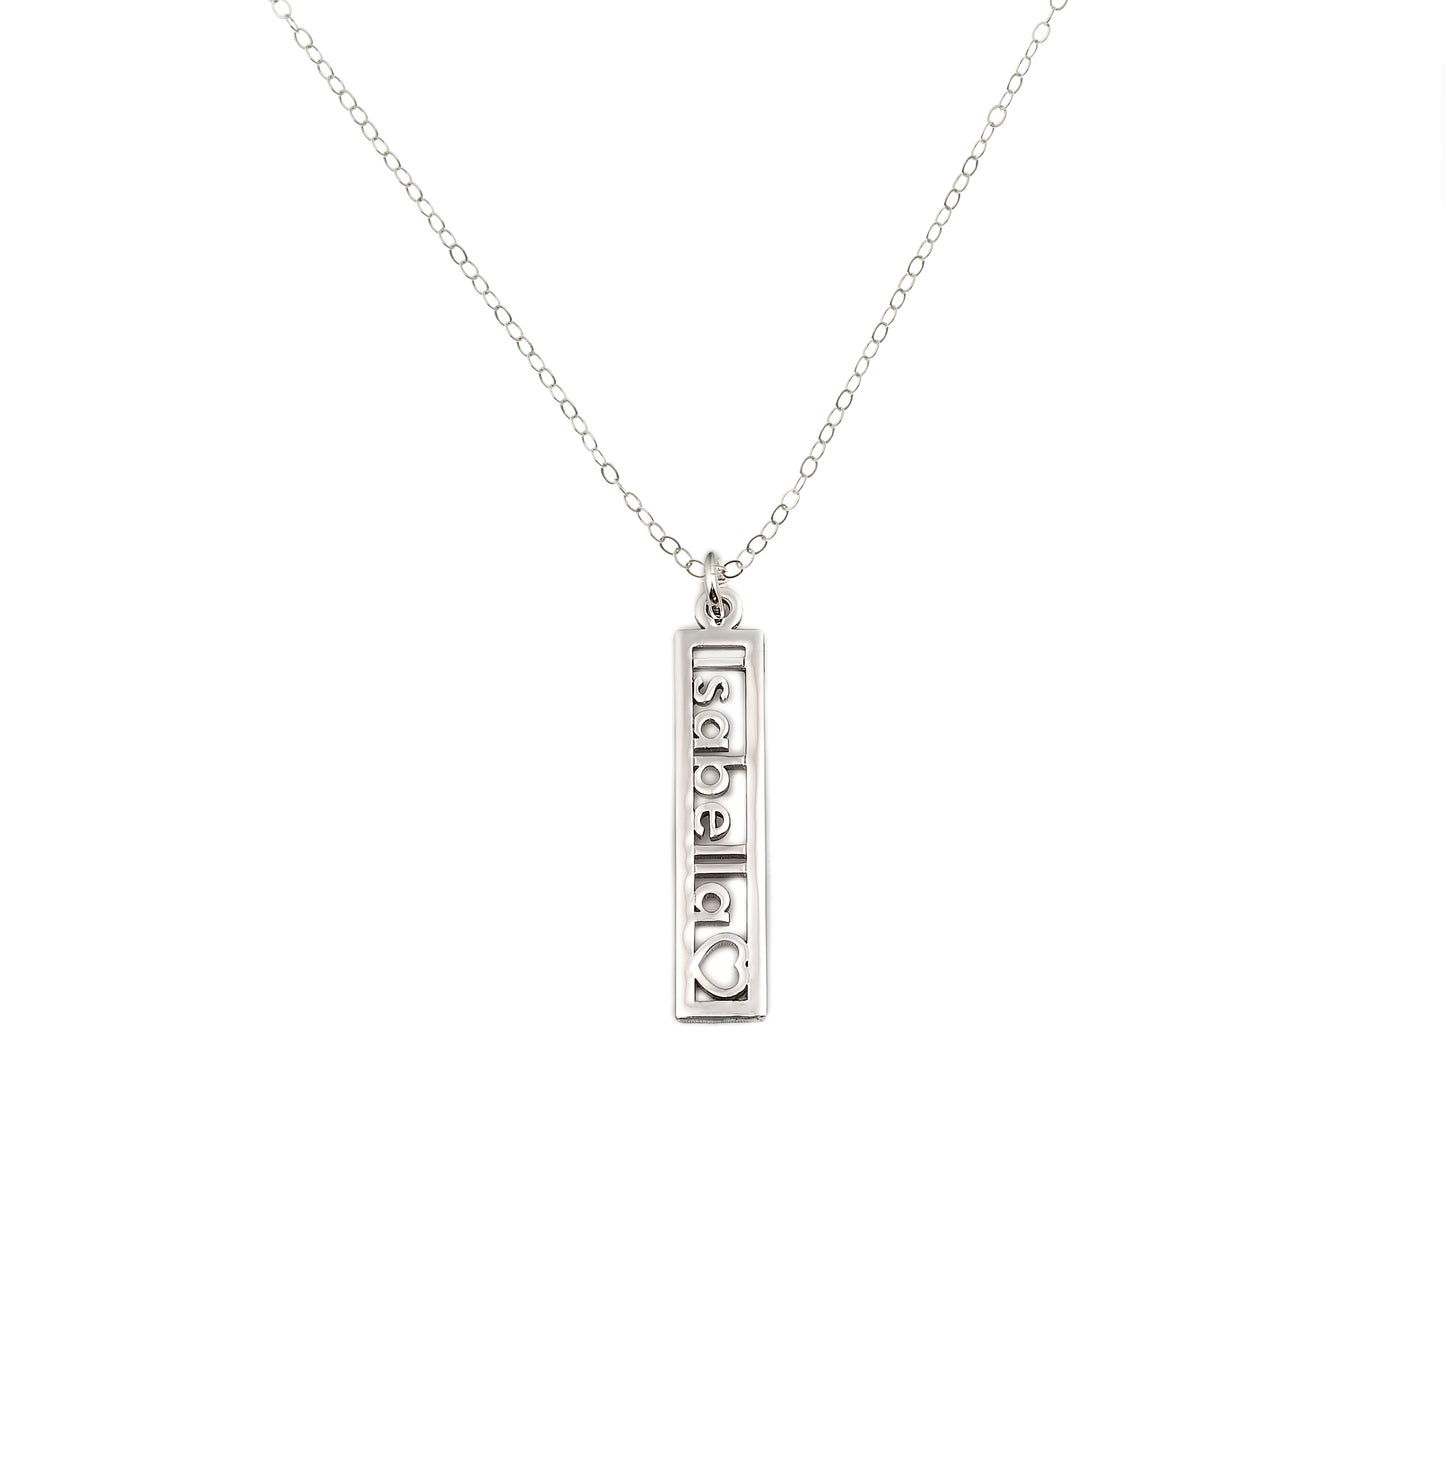 Open Single with Heart Cut Out Personalized Sterling Silver Name Necklace